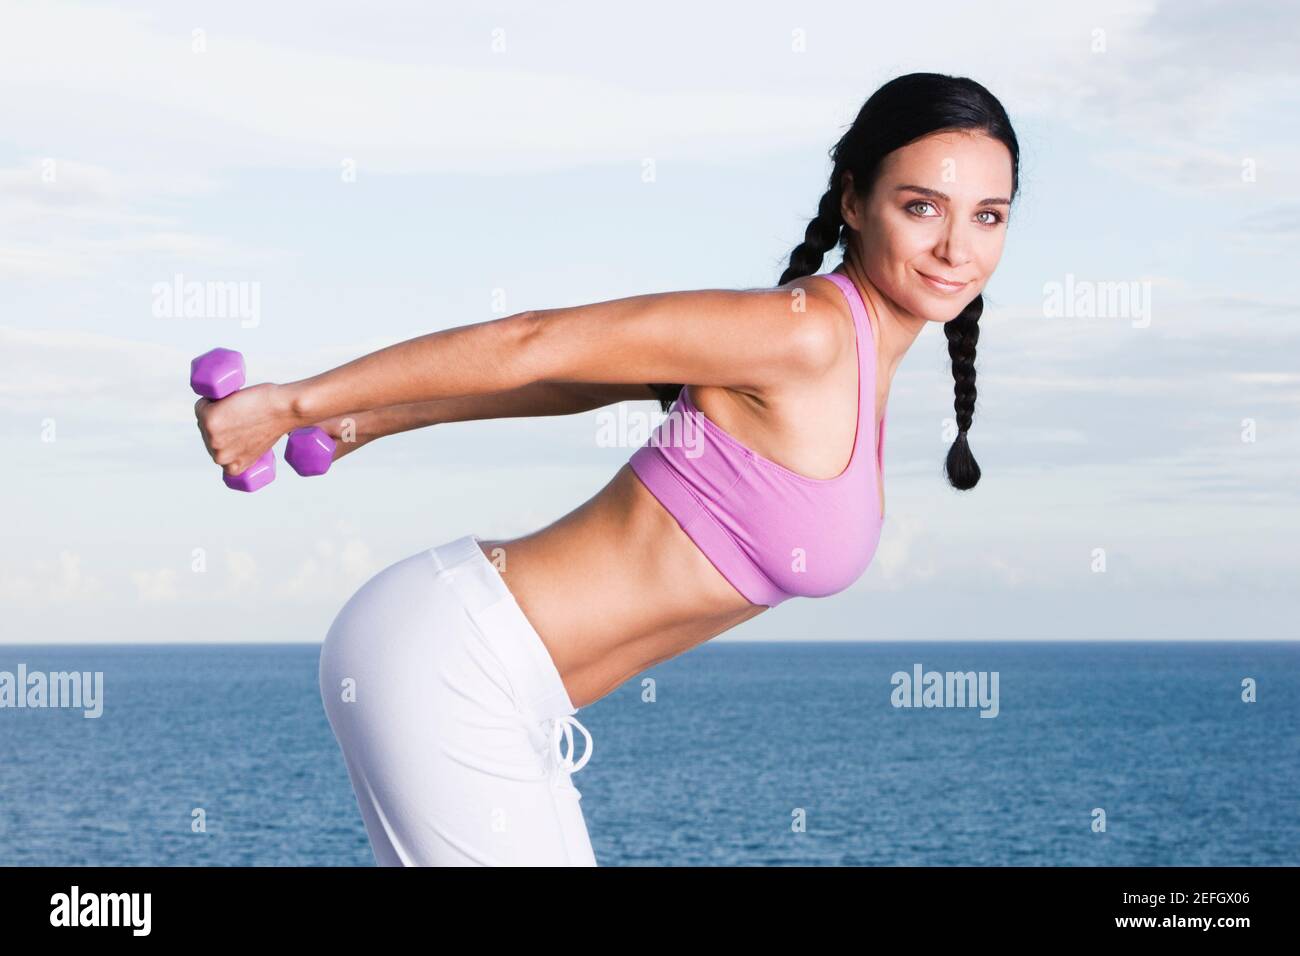 Portrait of a young woman exercising with dumbbells Stock Photo